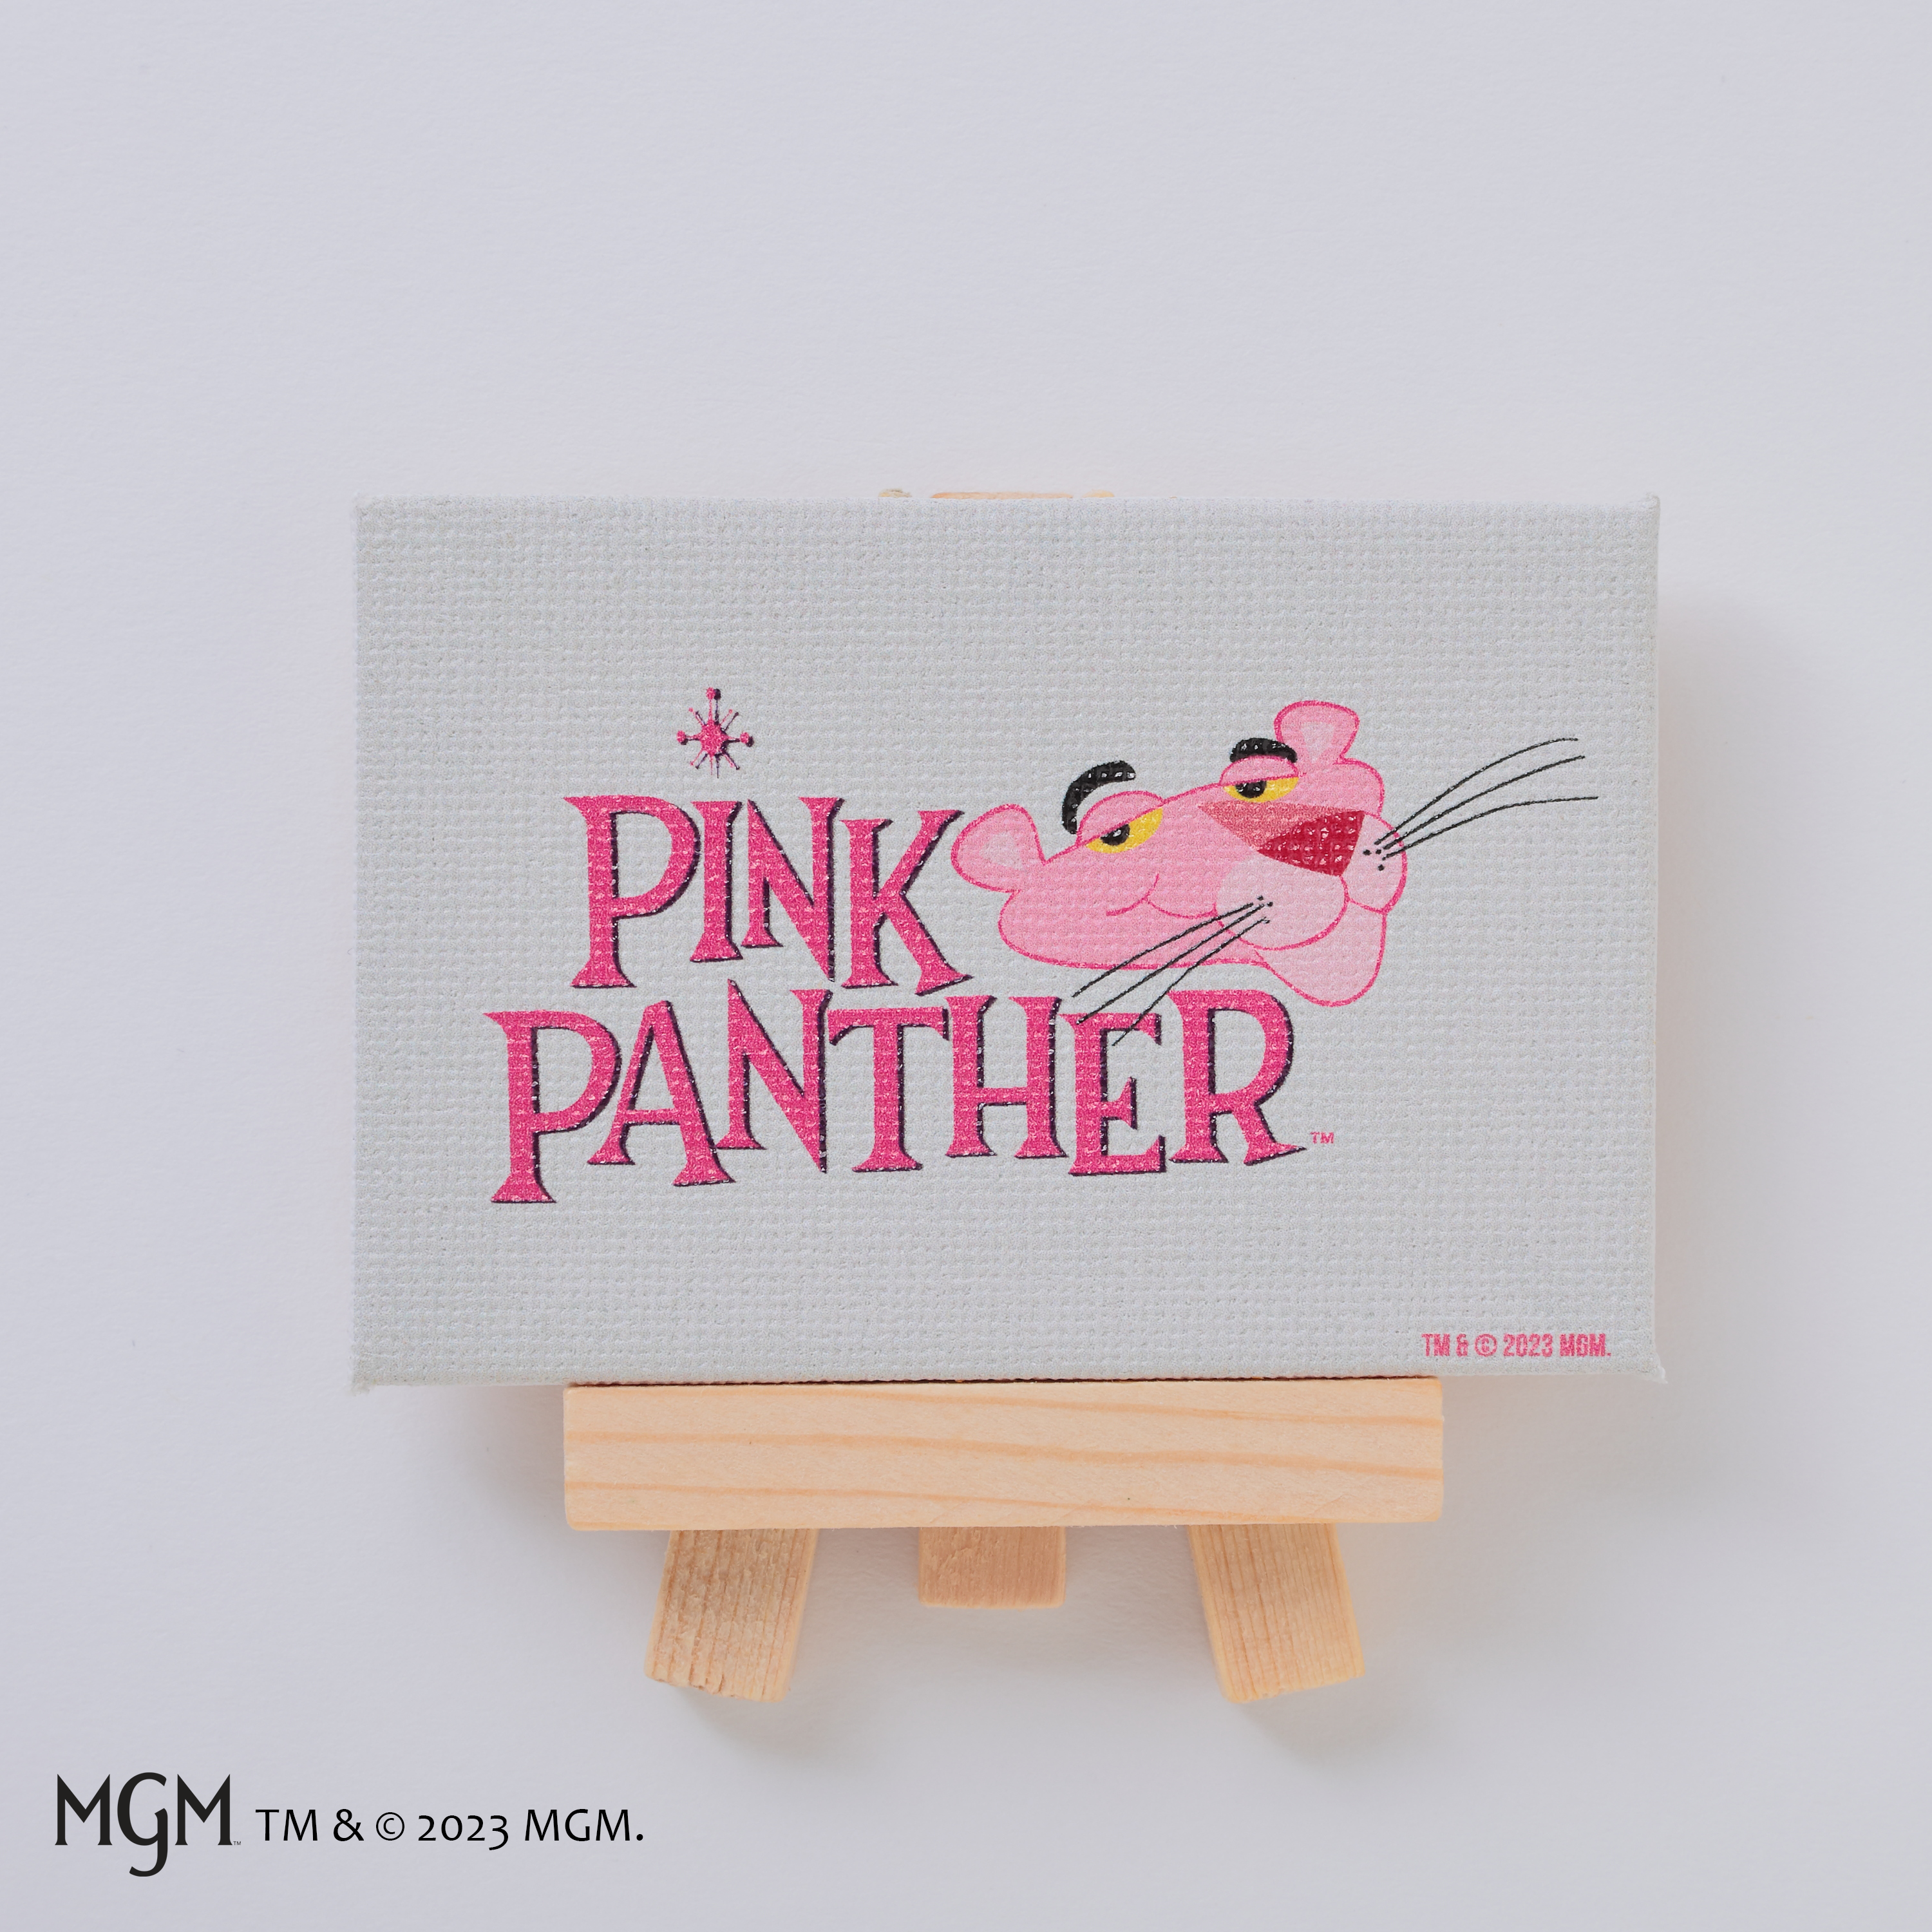 Mini panther with Pink Panther